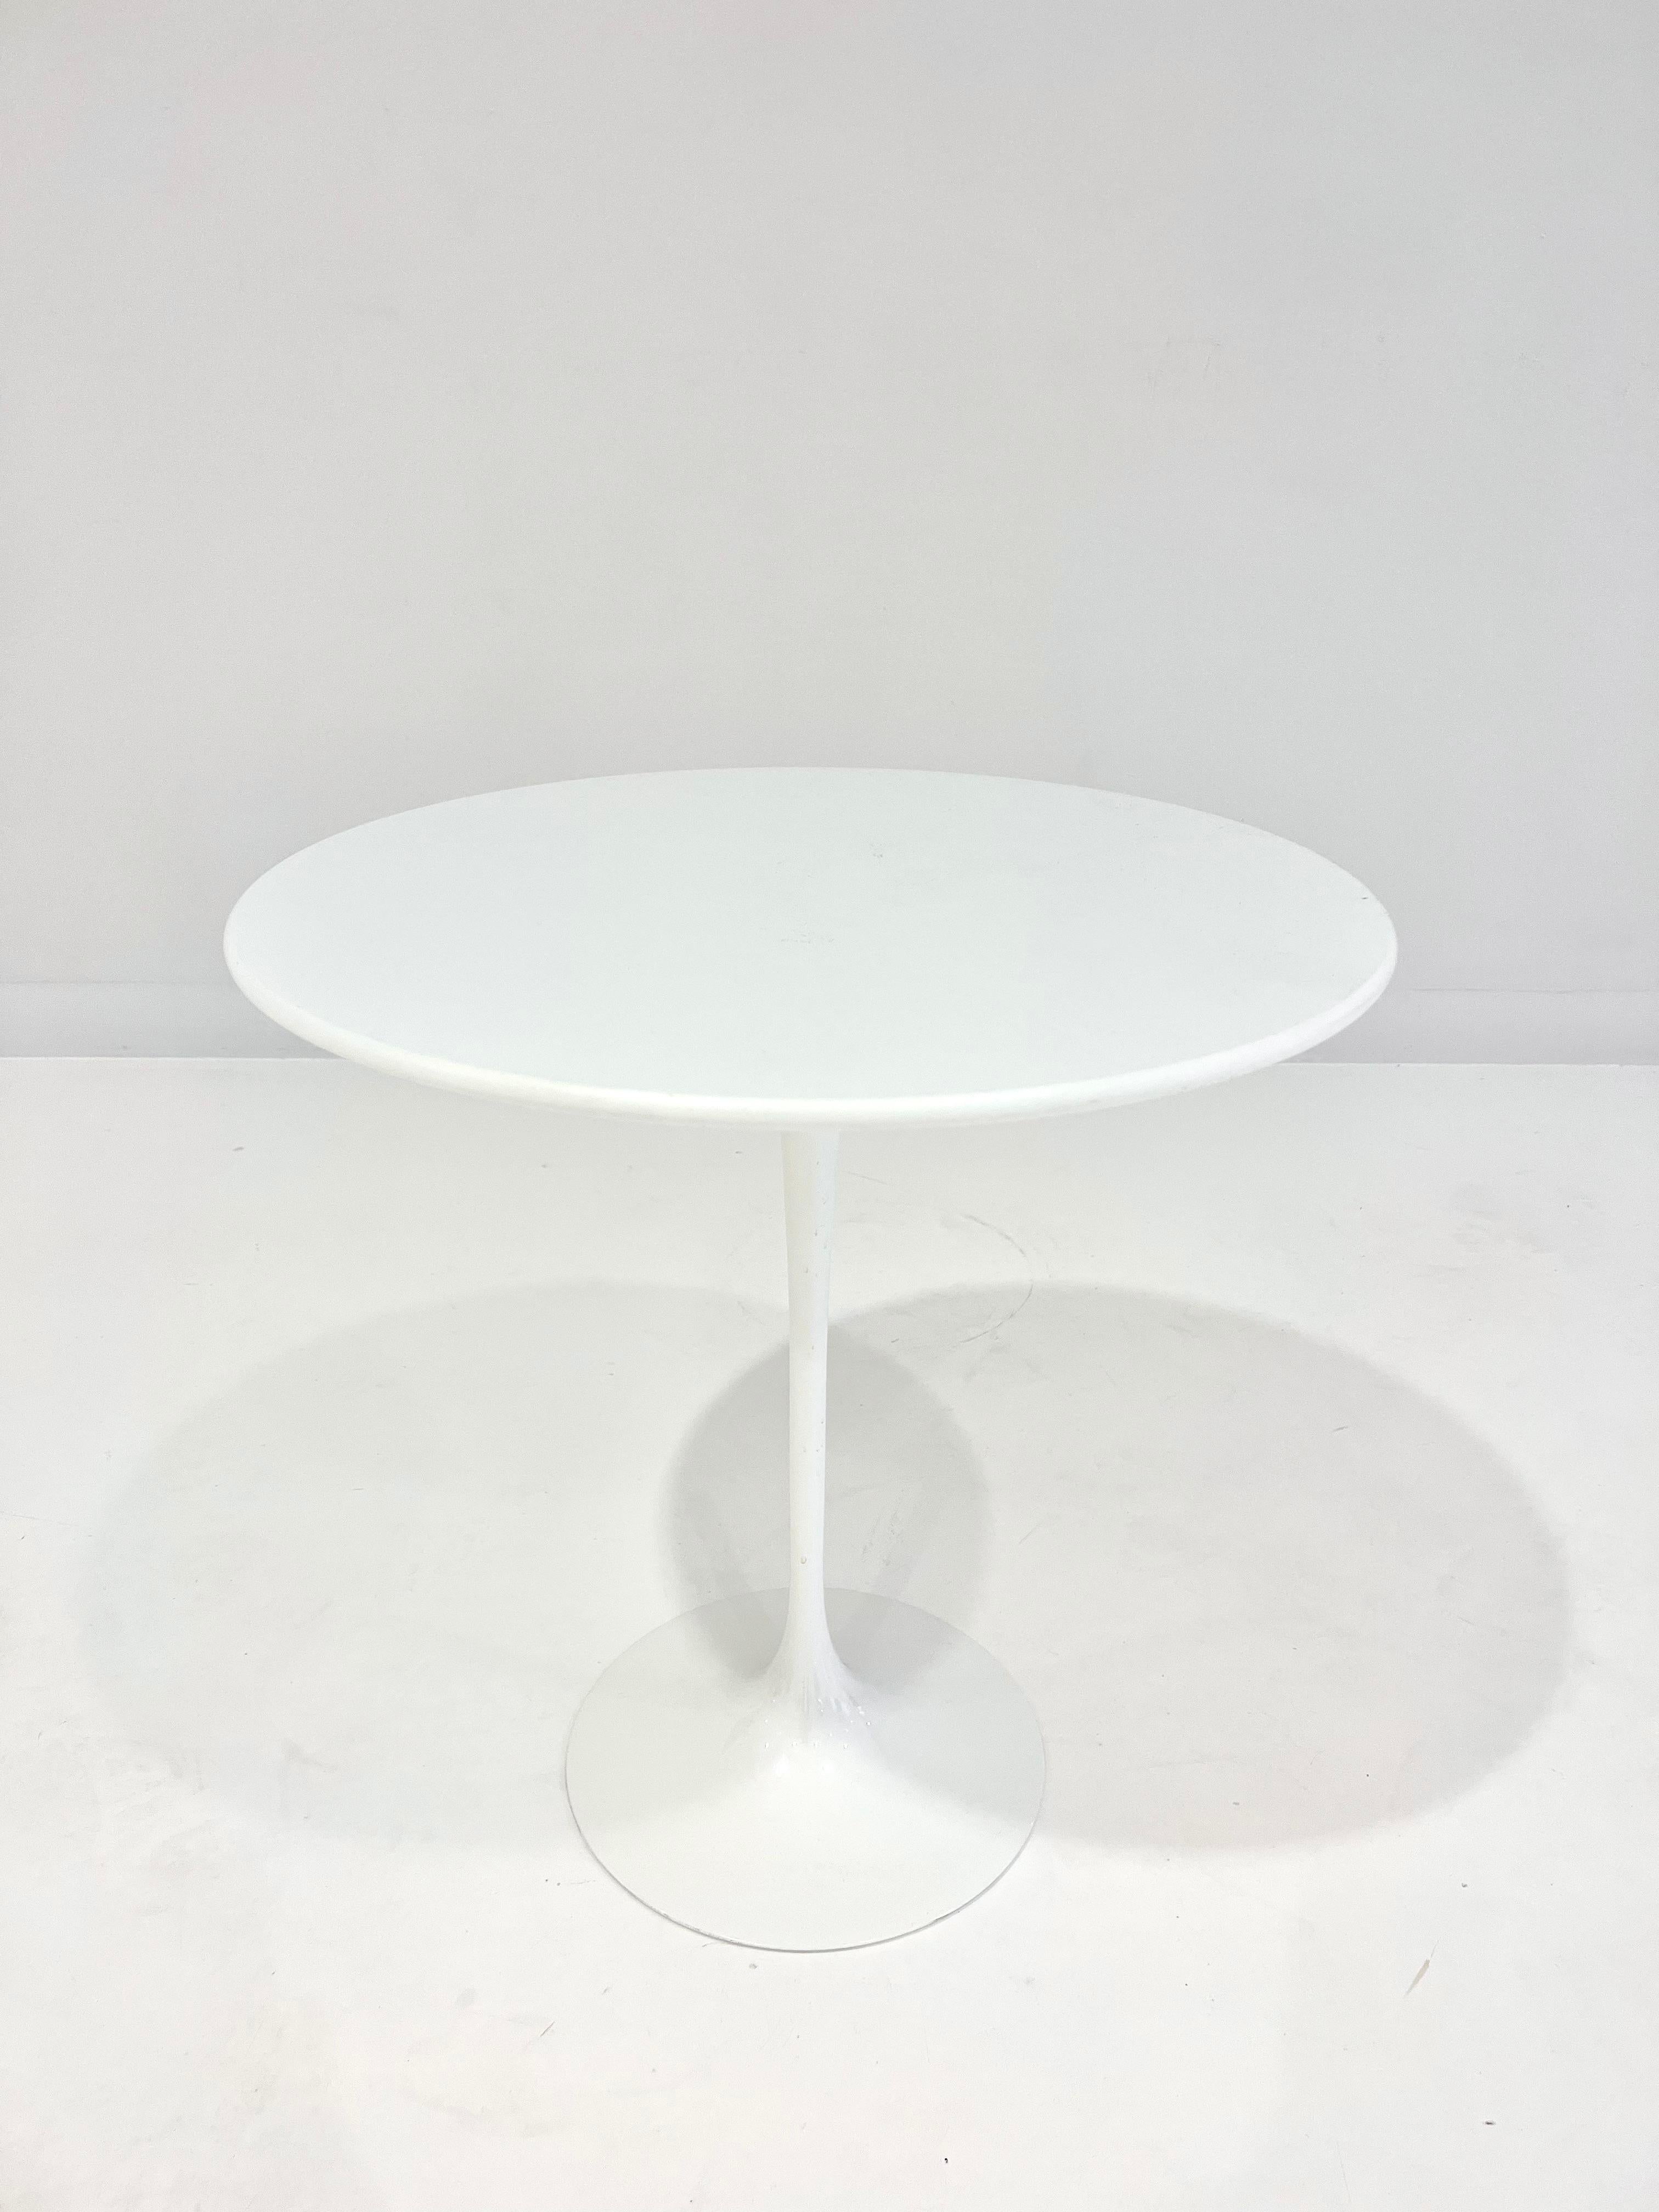 Authentic Eero Saarinen's signature white pedestal Tulip Table by Knoll Studio, with laminate top and cast-aluminum base, 1956.
Signature plate on the underside.
**List Price: $1,400/EACH (Two available)